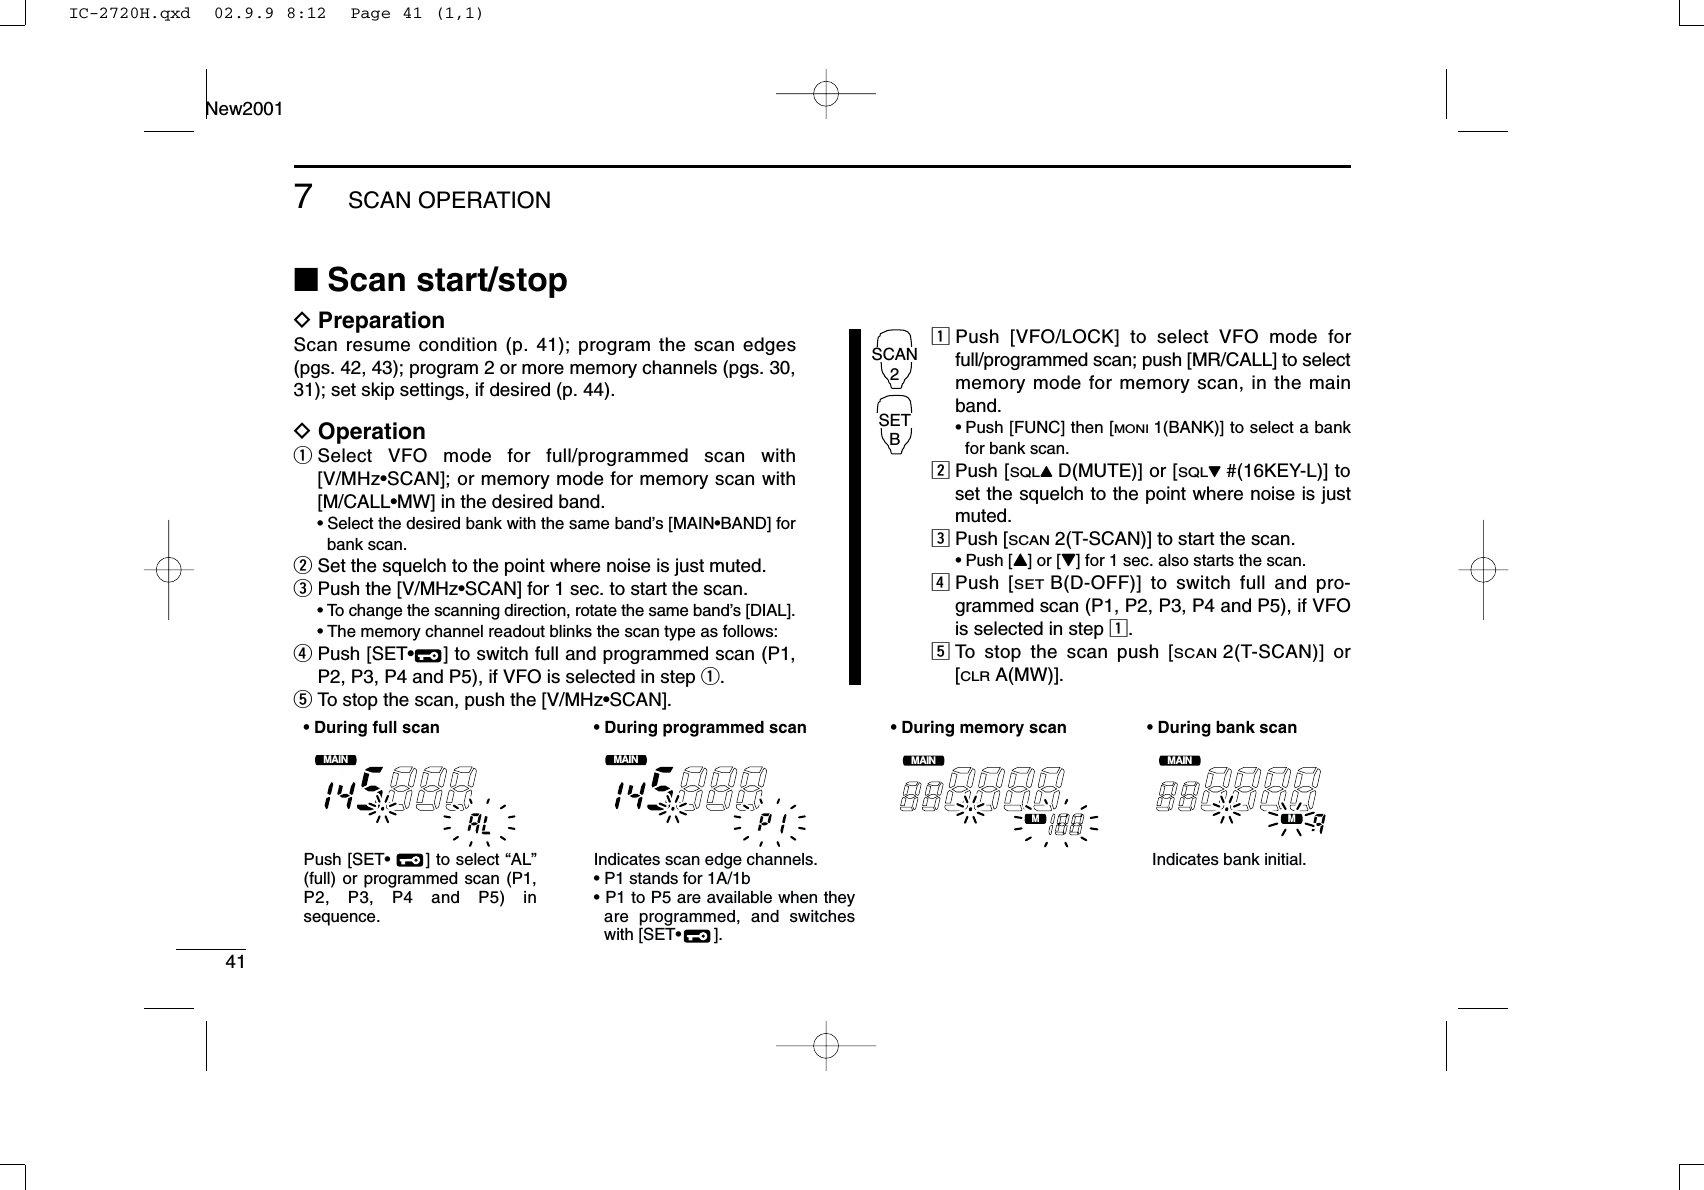 417SCAN OPERATIONNew2001■Scan start/stopDPreparationScan resume condition (p. 41); program the scan edges(pgs. 42, 43); program 2 or more memory channels (pgs. 30,31); set skip settings, if desired (p. 44).DOperationqSelect VFO mode for full/programmed scan with[V/MHz•SCAN]; or memory mode for memory scan with[M/CALL•MW] in the desired band.•Select the desired bank with the same band’s [MAIN•BAND] forbank scan.wSet the squelch to the point where noise is just muted.ePush the [V/MHz•SCAN] for 1 sec. to start the scan.•To change the scanning direction, rotate the same band’s [DIAL].•The memory channel readout blinks the scan type as follows:rPush [SET•] to switch full and programmed scan (P1,P2, P3, P4 and P5), if VFO is selected in step q.tTo stop the scan, push the [V/MHz•SCAN].zPush [VFO/LOCK] to select VFO mode forfull/programmed scan; push [MR/CALL] to selectmemory mode for memory scan, in the mainband.•Push [FUNC] then [MONI1(BANK)] to select a bankfor bank scan.xPush [SQLYD(MUTE)] or [SQLZ#(16KEY-L)] toset the squelch to the point where noise is justmuted.cPush [SCAN2(T-SCAN)] to start the scan.•Push [Y] or [Z] for 1 sec. also starts the scan.vPush [SETB(D-OFF)] to switch full and pro-grammed scan (P1, P2, P3, P4 and P5), if VFOis selected in step z.bTo stop the scan push [SCAN2(T-SCAN)] or[CLRA(MW)].SCAN2SETBMAINT  XMMAINT  XMMAINT  XMMAINT  XM• During full scan • During programmed scan • During memory scan • During bank scanIndicates scan edge channels.• P1 stands for 1A/1b• P1 to P5 are available when they are programmed, and switches with [SET•       ].Indicates bank initial.Push [SET•      ] to select “AL” (full) or programmed scan (P1, P2, P3, P4 and P5) in sequence.IC-2720H.qxd  02.9.9 8:12  Page 41 (1,1)